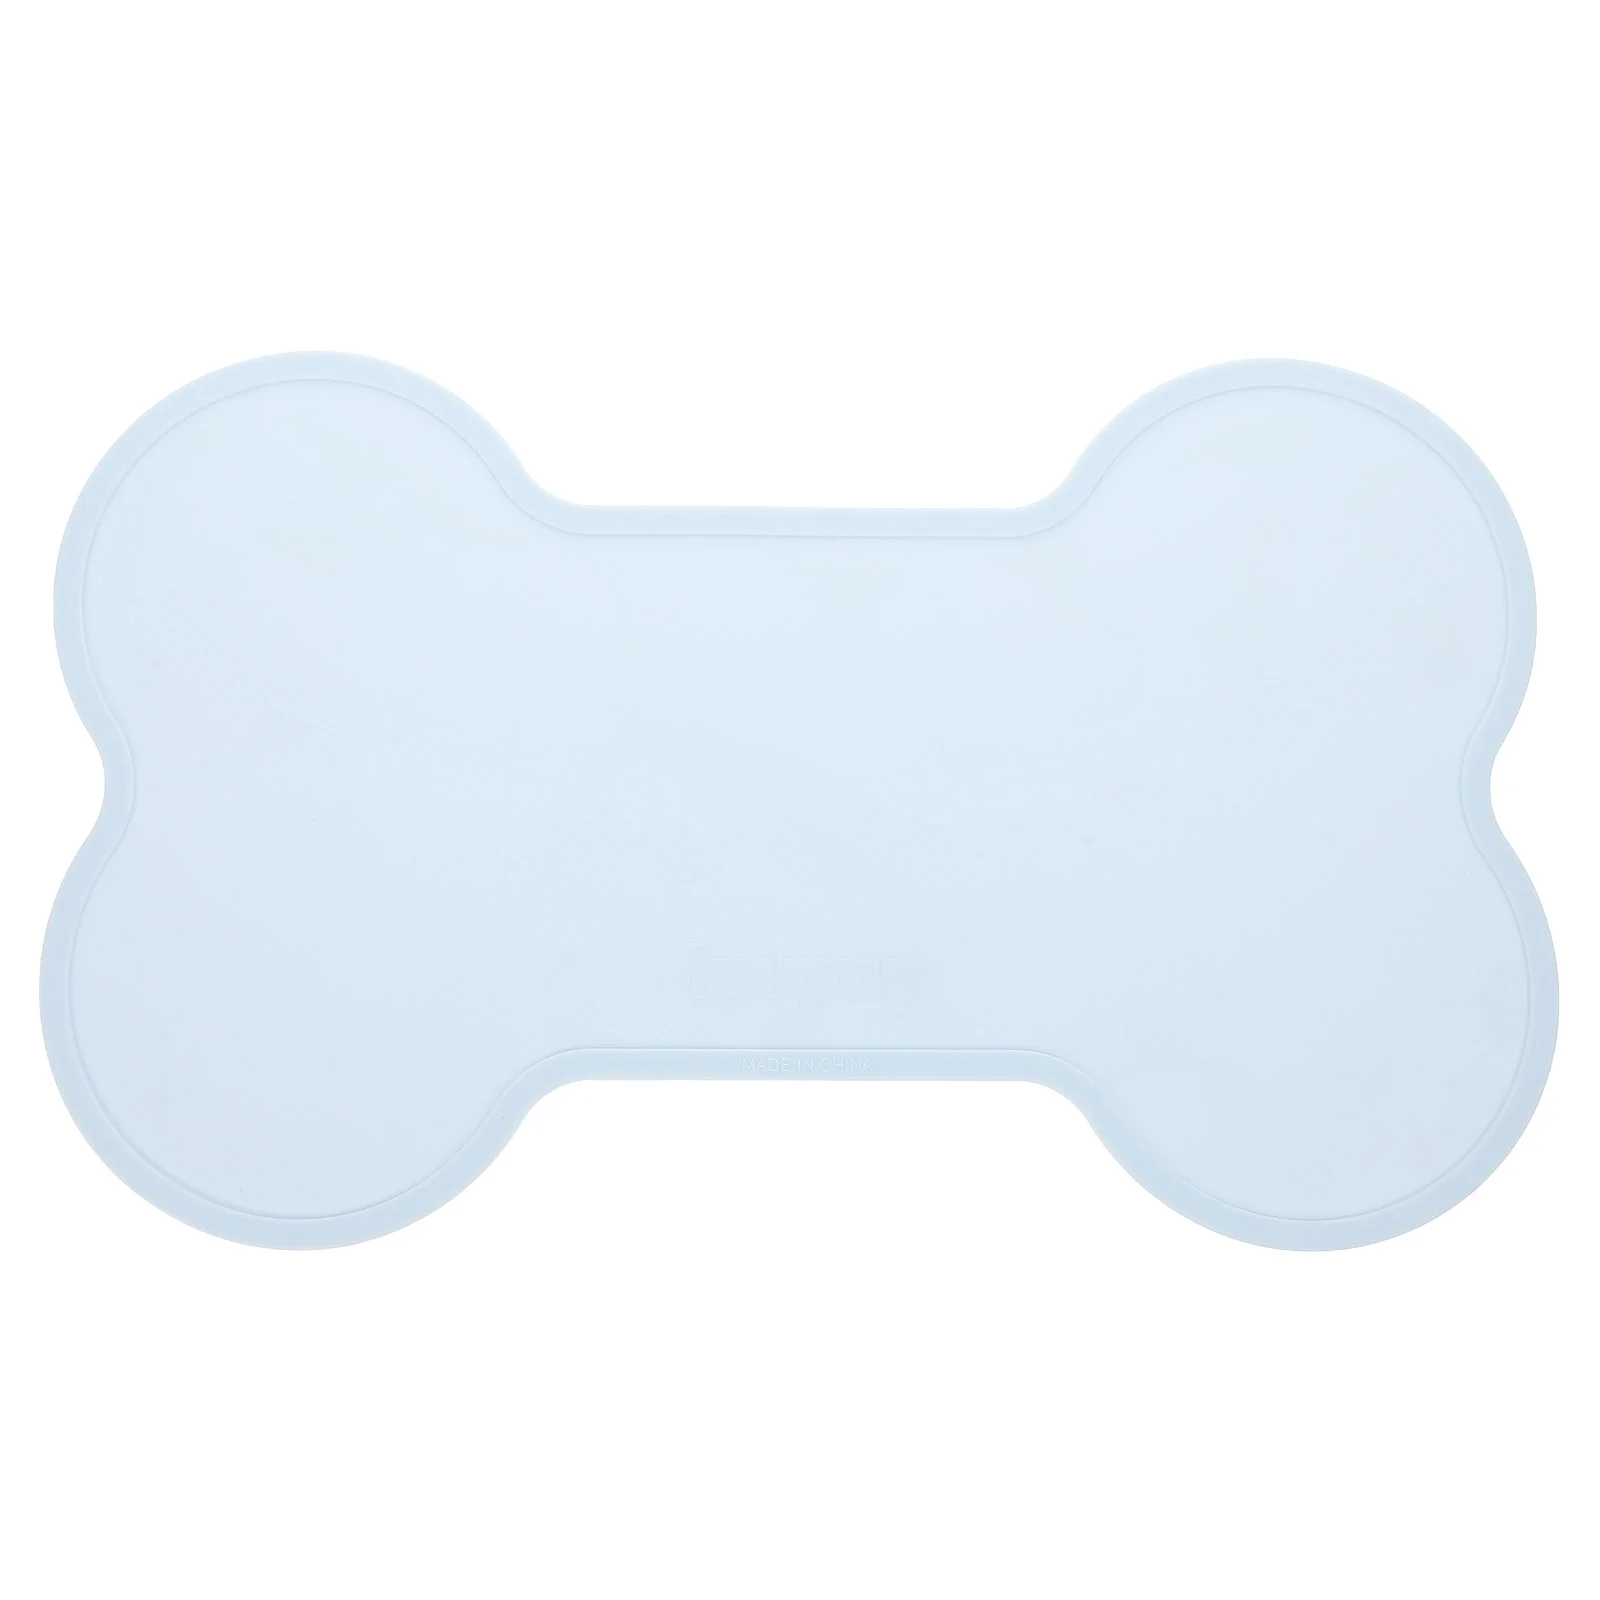 

Mat Dog Pet Food Bowl Cat Feeding Placemat Mats Silicone Water Tray Cushion Pads Dish Bowls Placemats Rubber Insulation Feeders